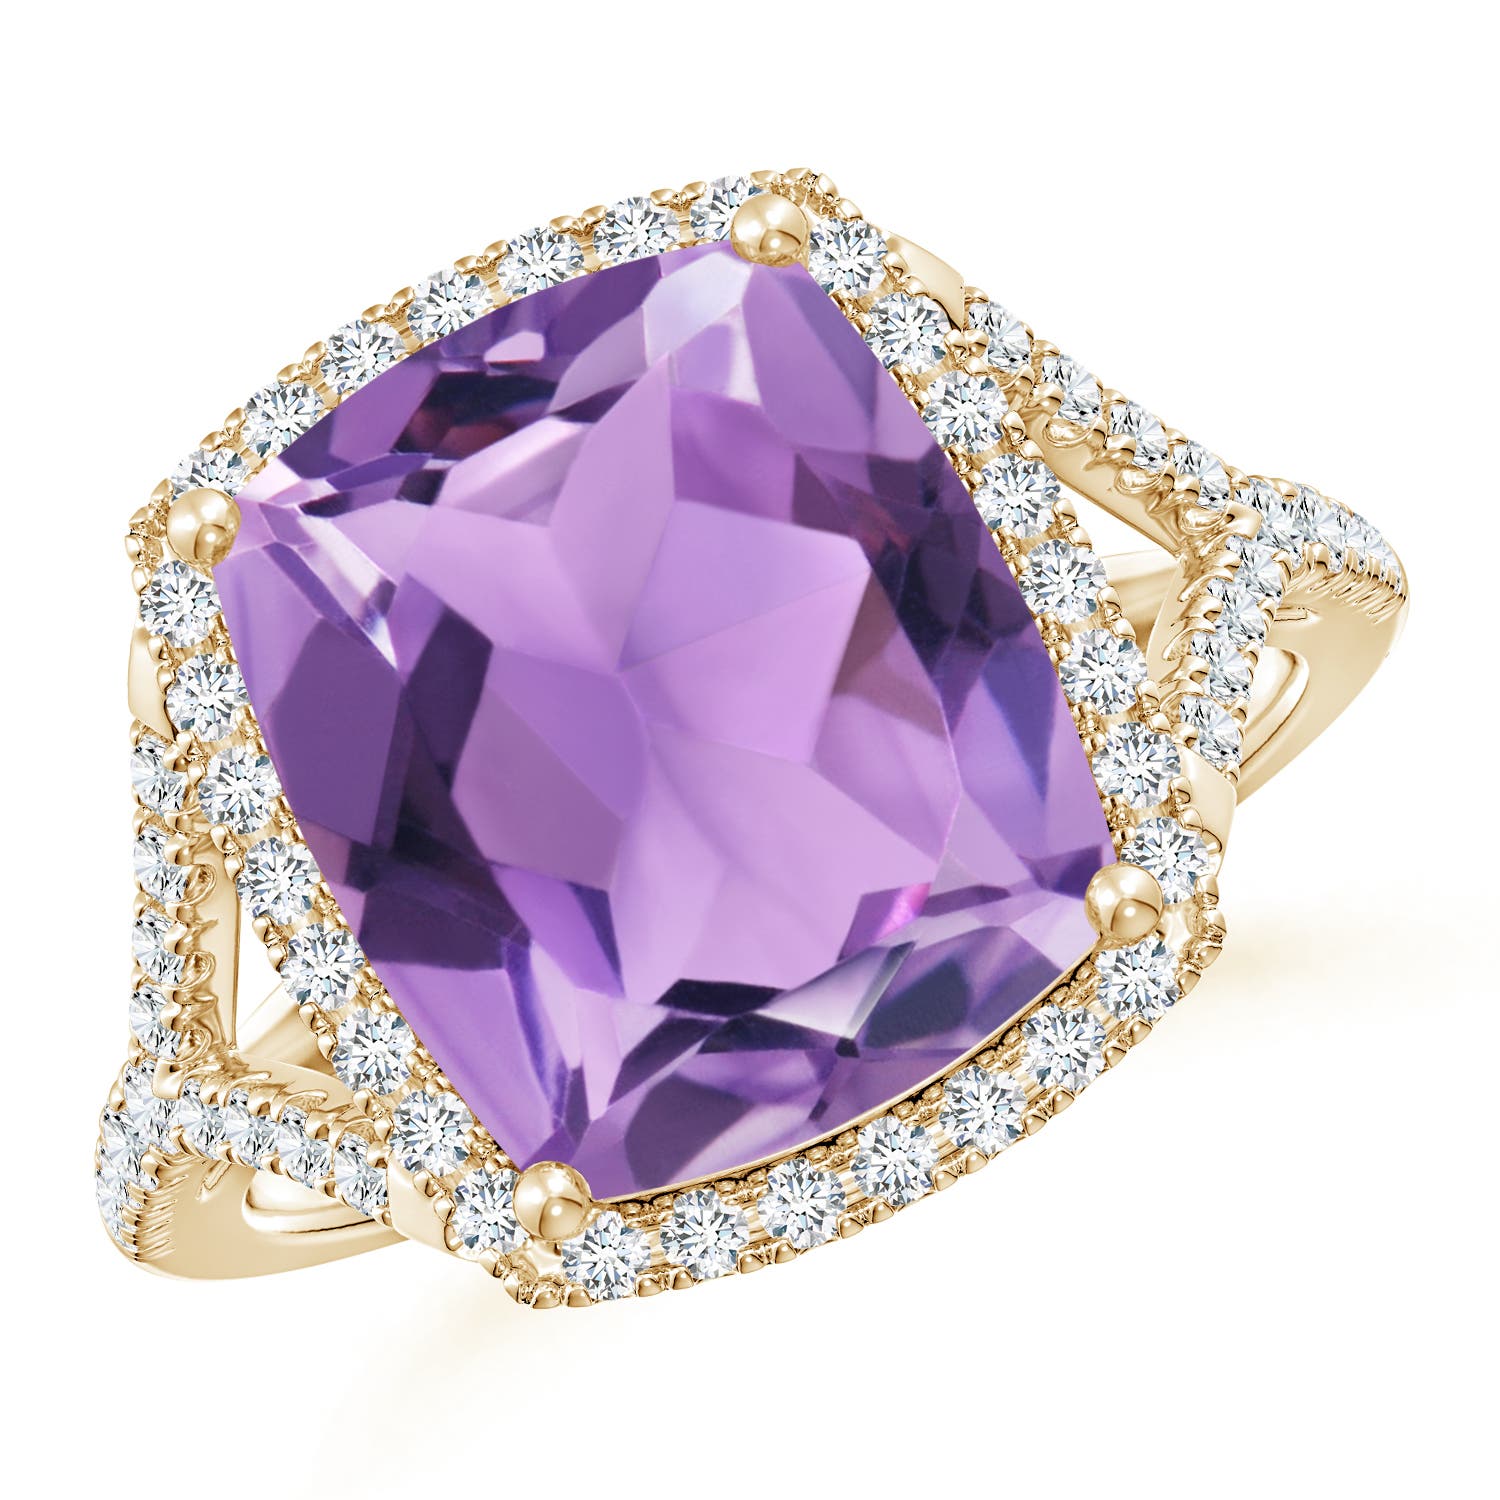 A - Amethyst / 5.07 CT / 14 KT Yellow Gold